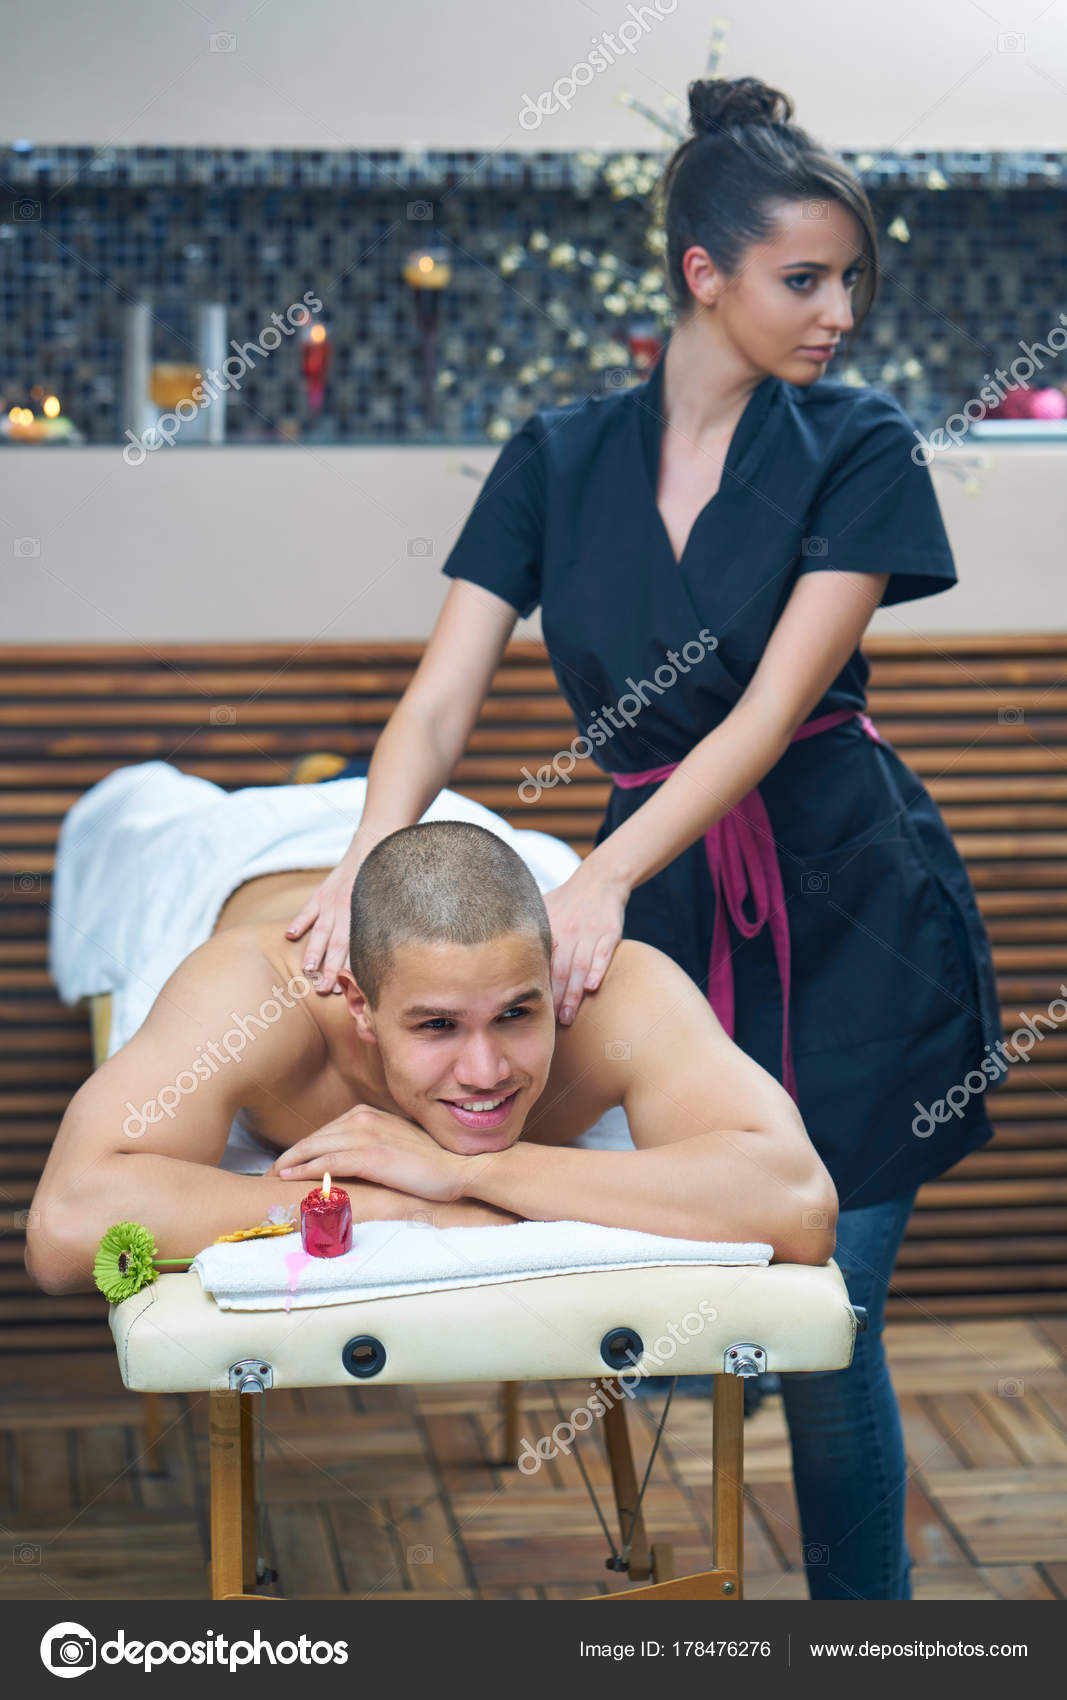 Sports massage. Massage therapist massaging shoulders of a male athlete,  working with Trapezius muscle. Toned image. Masseur doing massage on man  body in the spa salon. Beauty treatment concept. Stock Photo